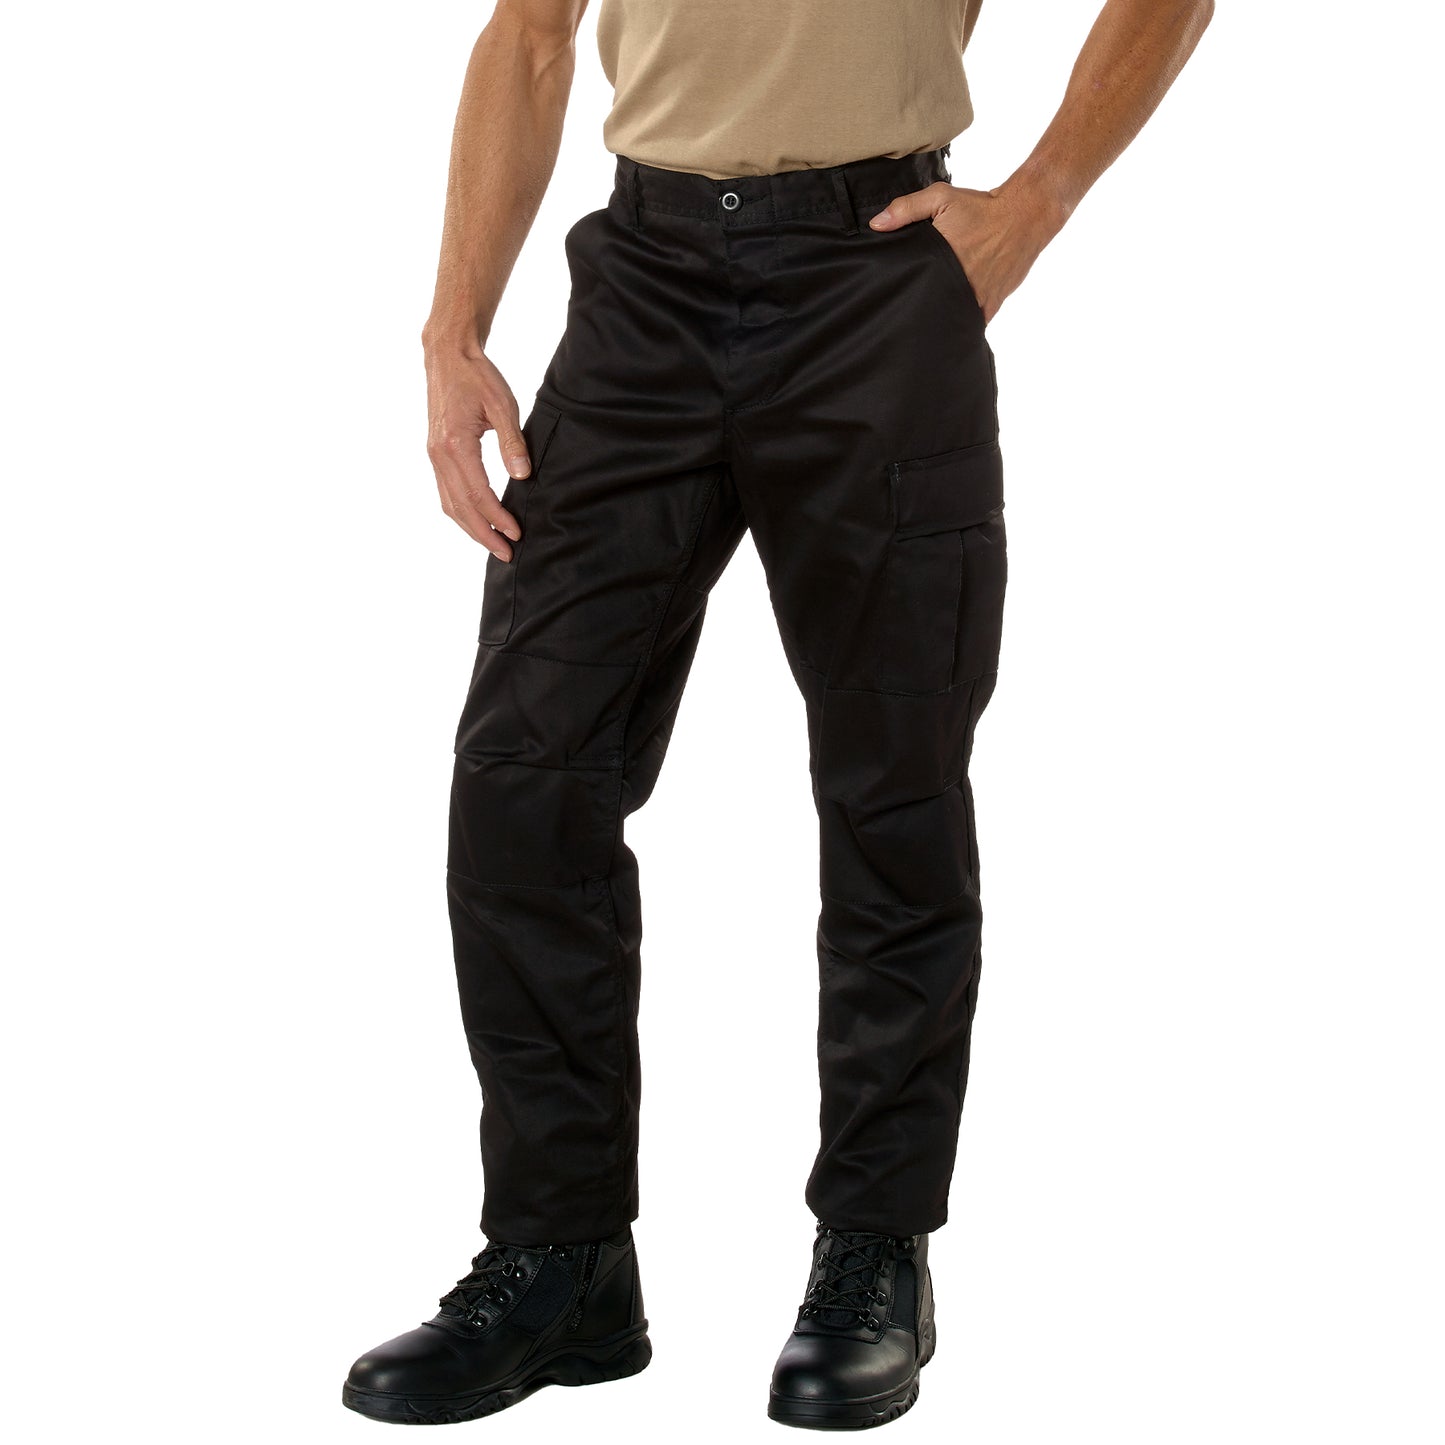 Relaxed Fit BDU Cargo Pants Black & Camouflage Zip Fly Mens Camo Battle Pants